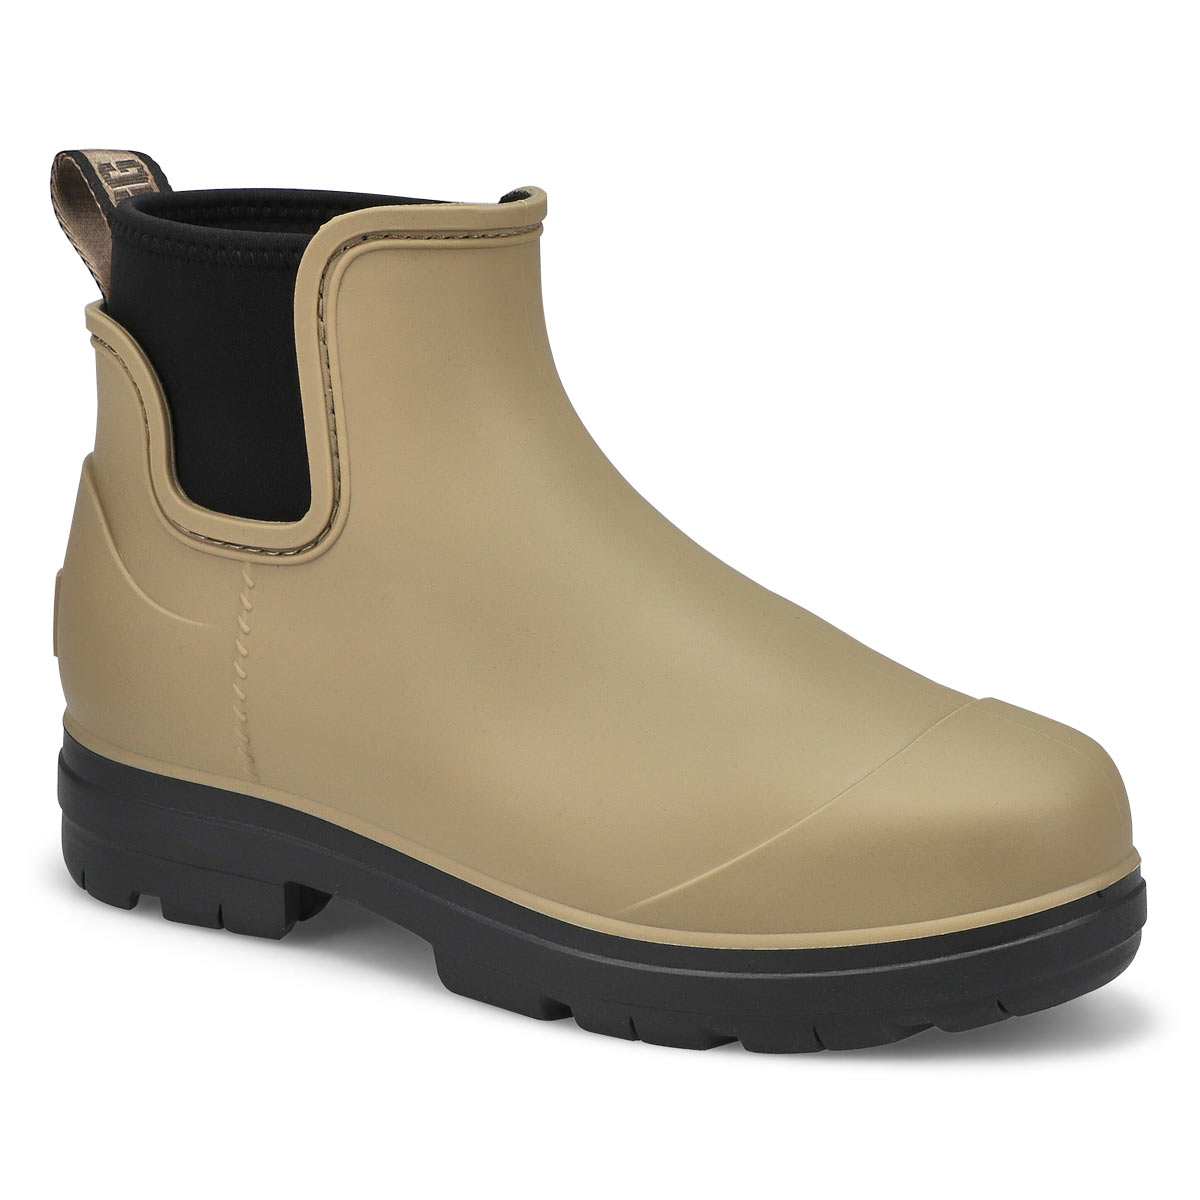 Womens Droplet Chelsea Rain Boot - Taupe